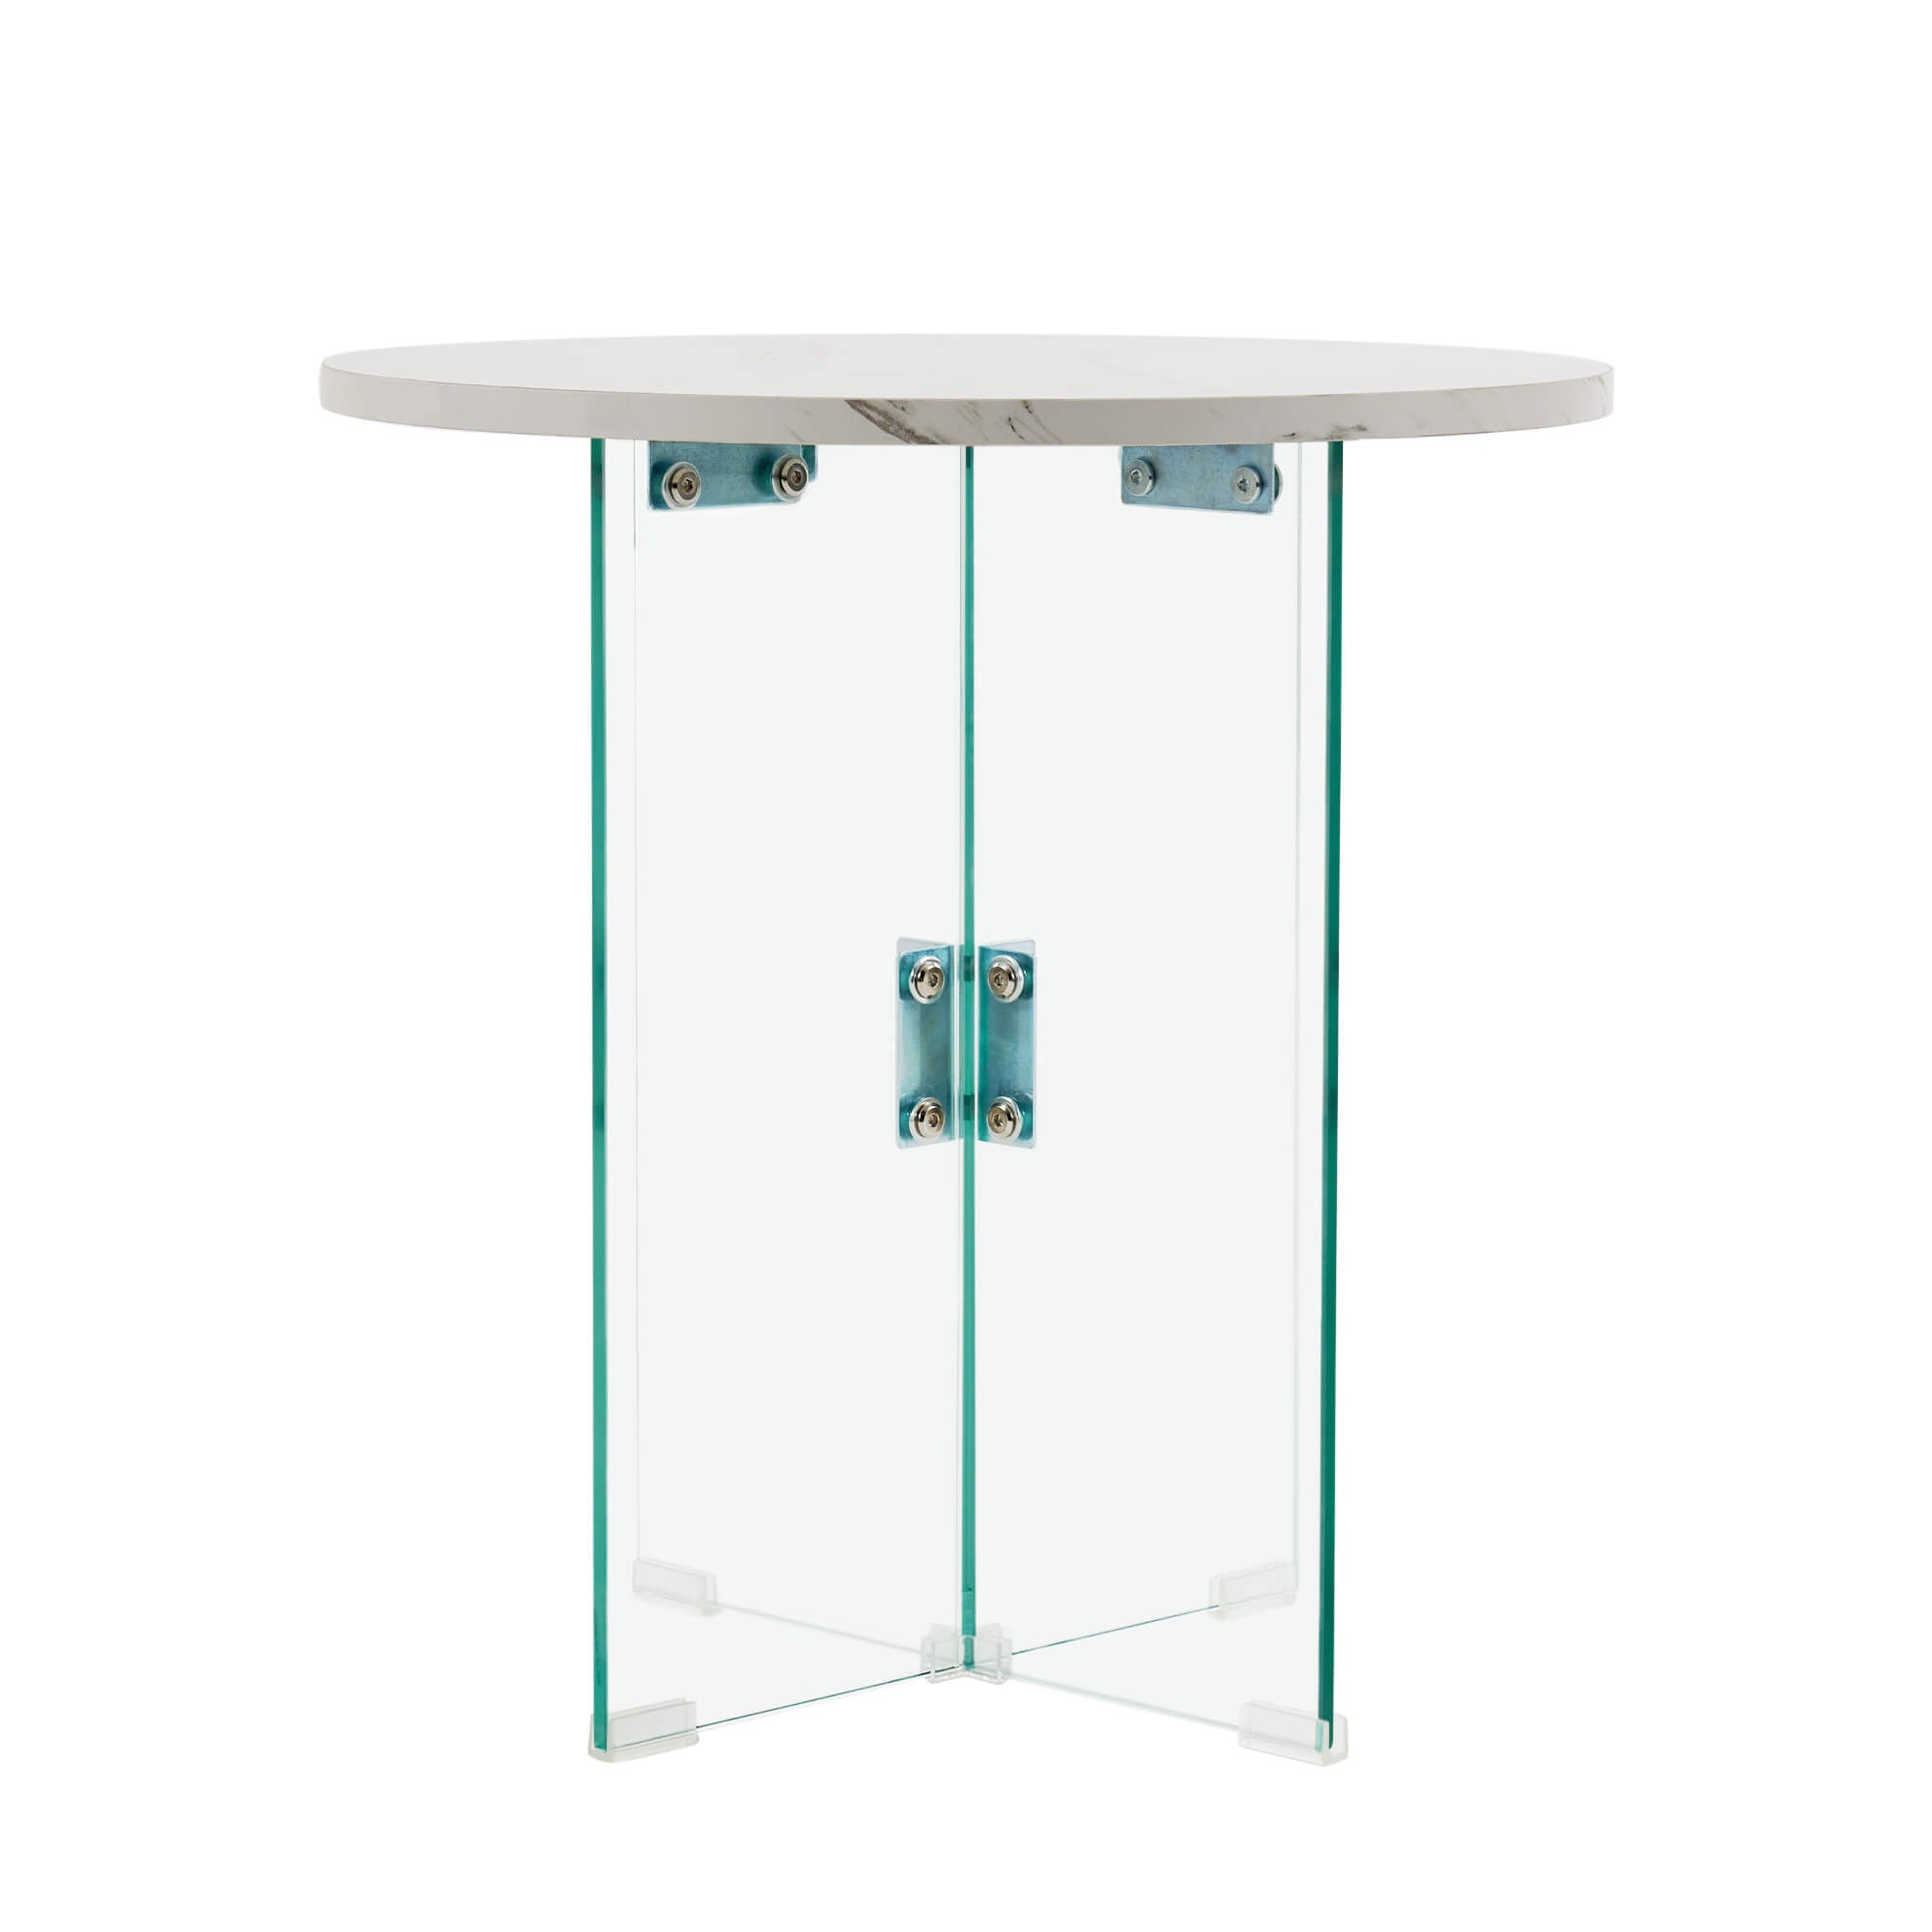 ivinta Modern End Table, Round Side Table with X Shaped Structure Legs, Marble Finish Small Accent Table, 8mm Tempered Glass Clear Corner Table for Living Room, Balcony, Bedroom, Porch, Small Space